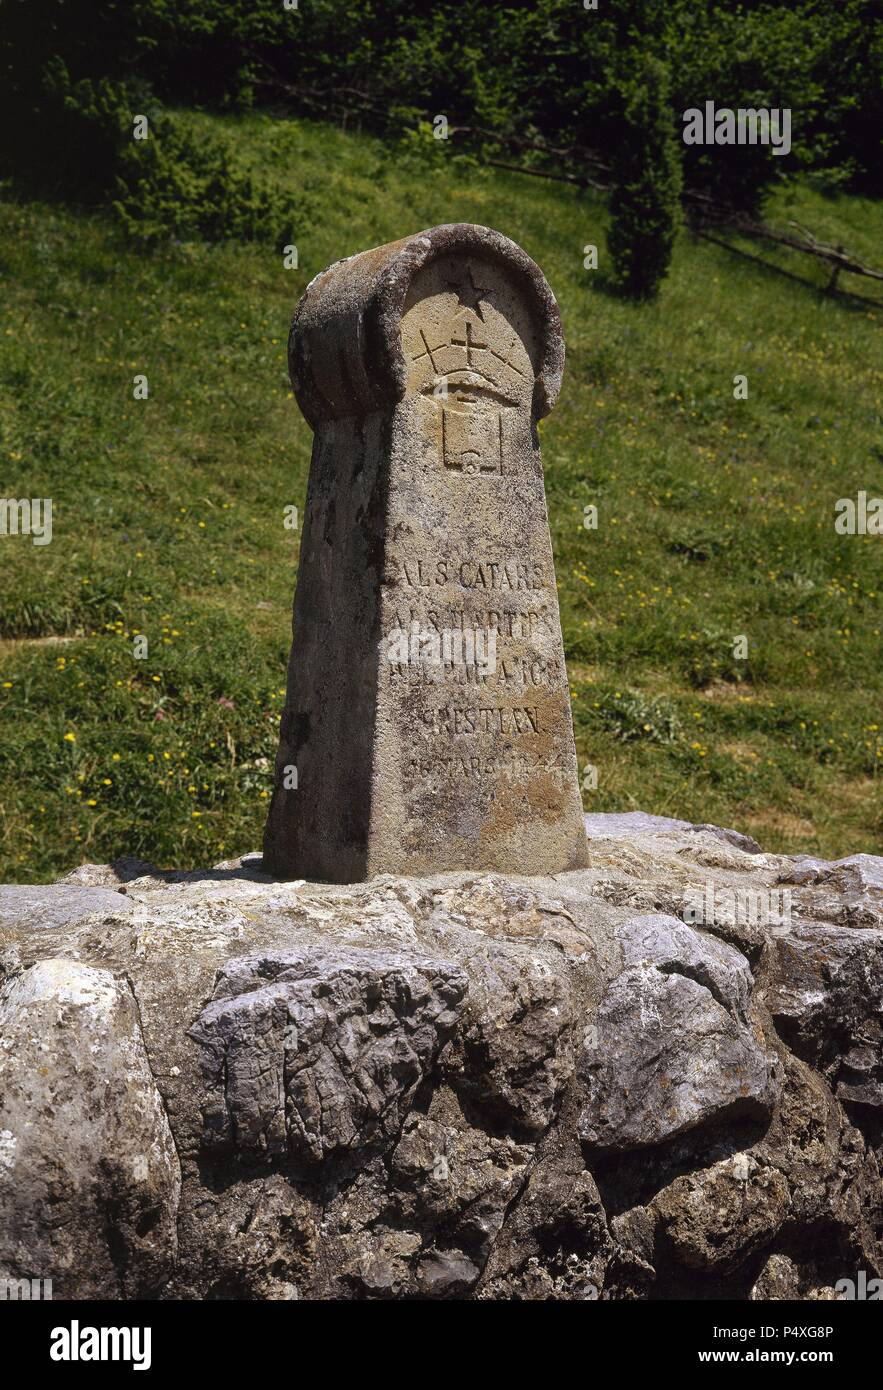 France. Medieval stele, erected in 1960, in memory of the Cathars were burned as heretics in the 13th century, after the crusade by Pope Innocent III. Meadow of Burned (Camp dels Cremats). Montsegur. Cathar Route. Stock Photo